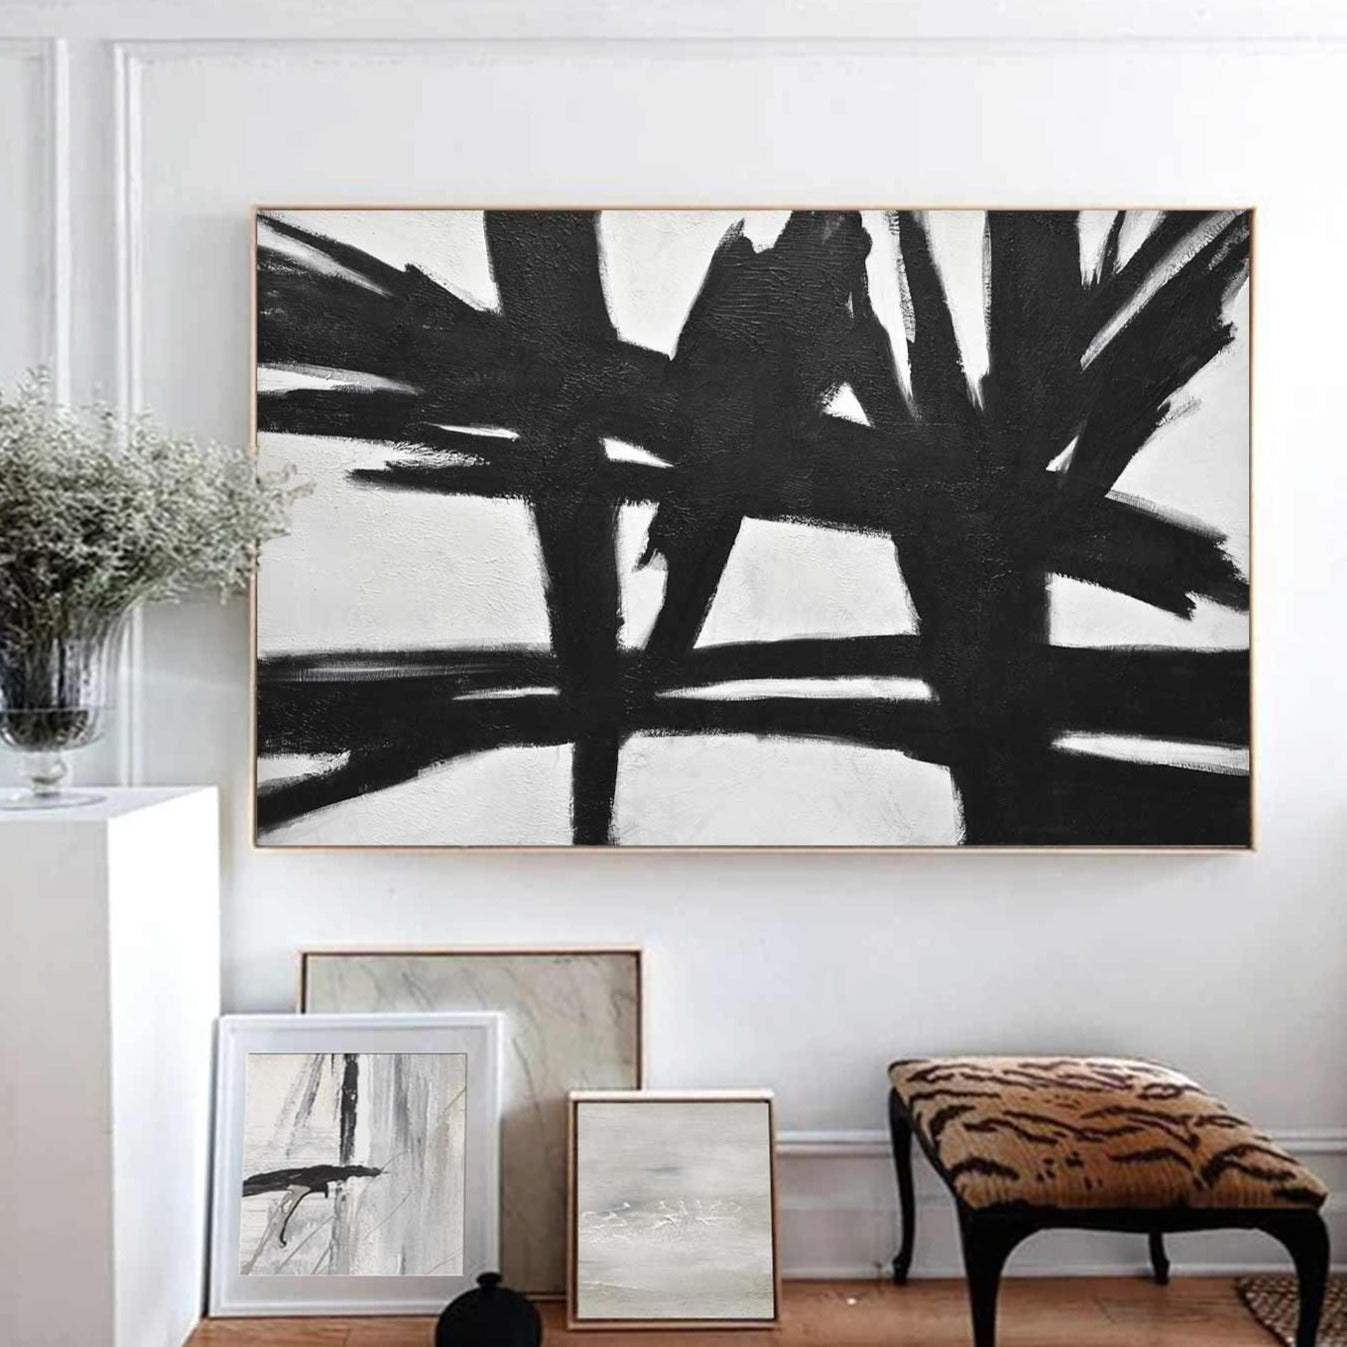 Retro Style Abstract Painting Black White 50's Art "Reaching Out"